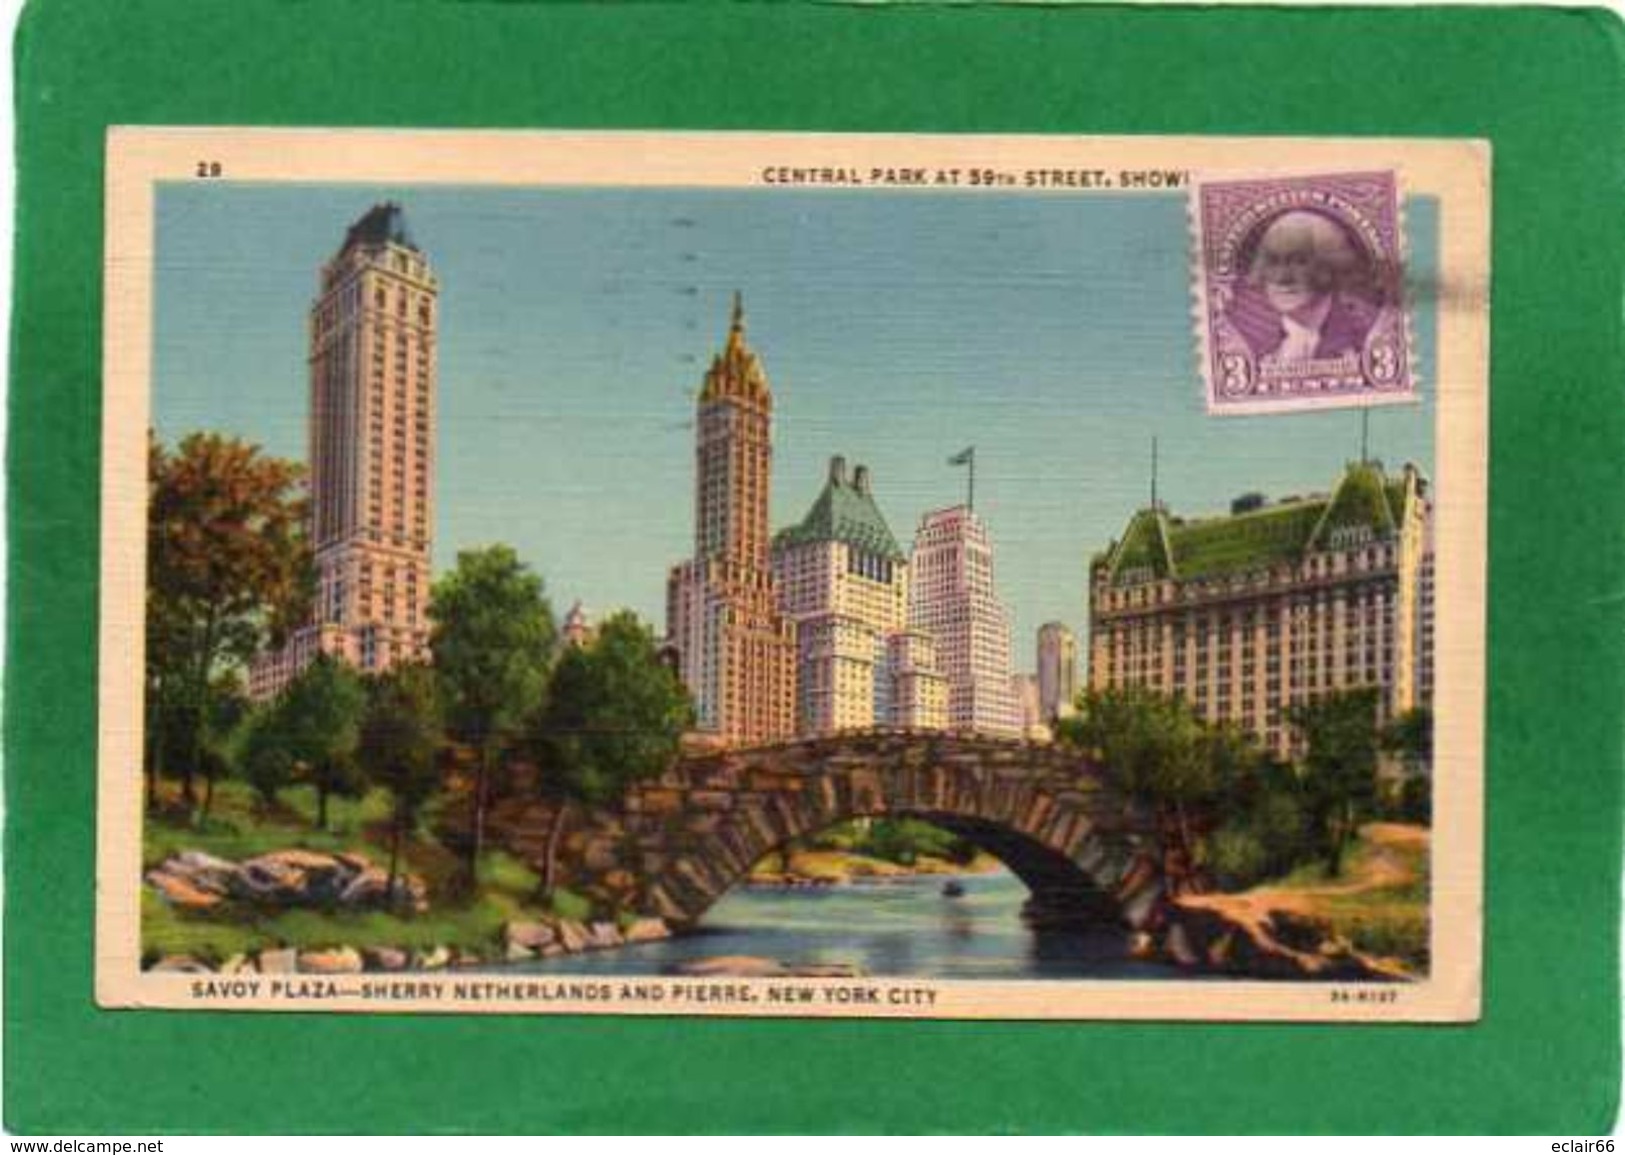 ETATS UNIS - NEW YORK - FIFTH AVENUE SKYLINE FROM CENTRAL PARK- SHOWING HOTELS PIERRE-SHERRY NETHERLAND-SAVOY PLAZA - Central Park